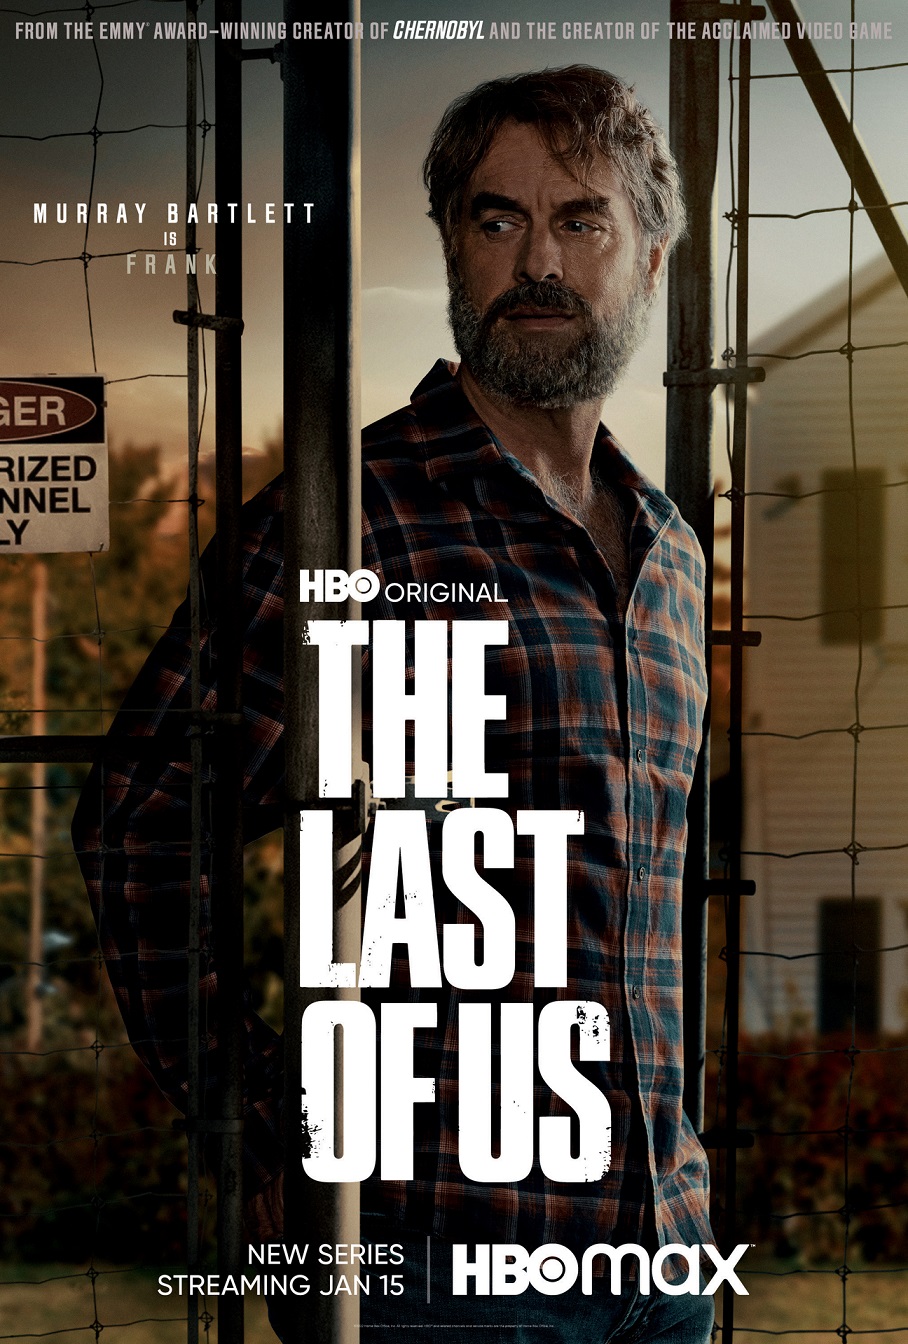 HBO's The Last of Us Ep. 3